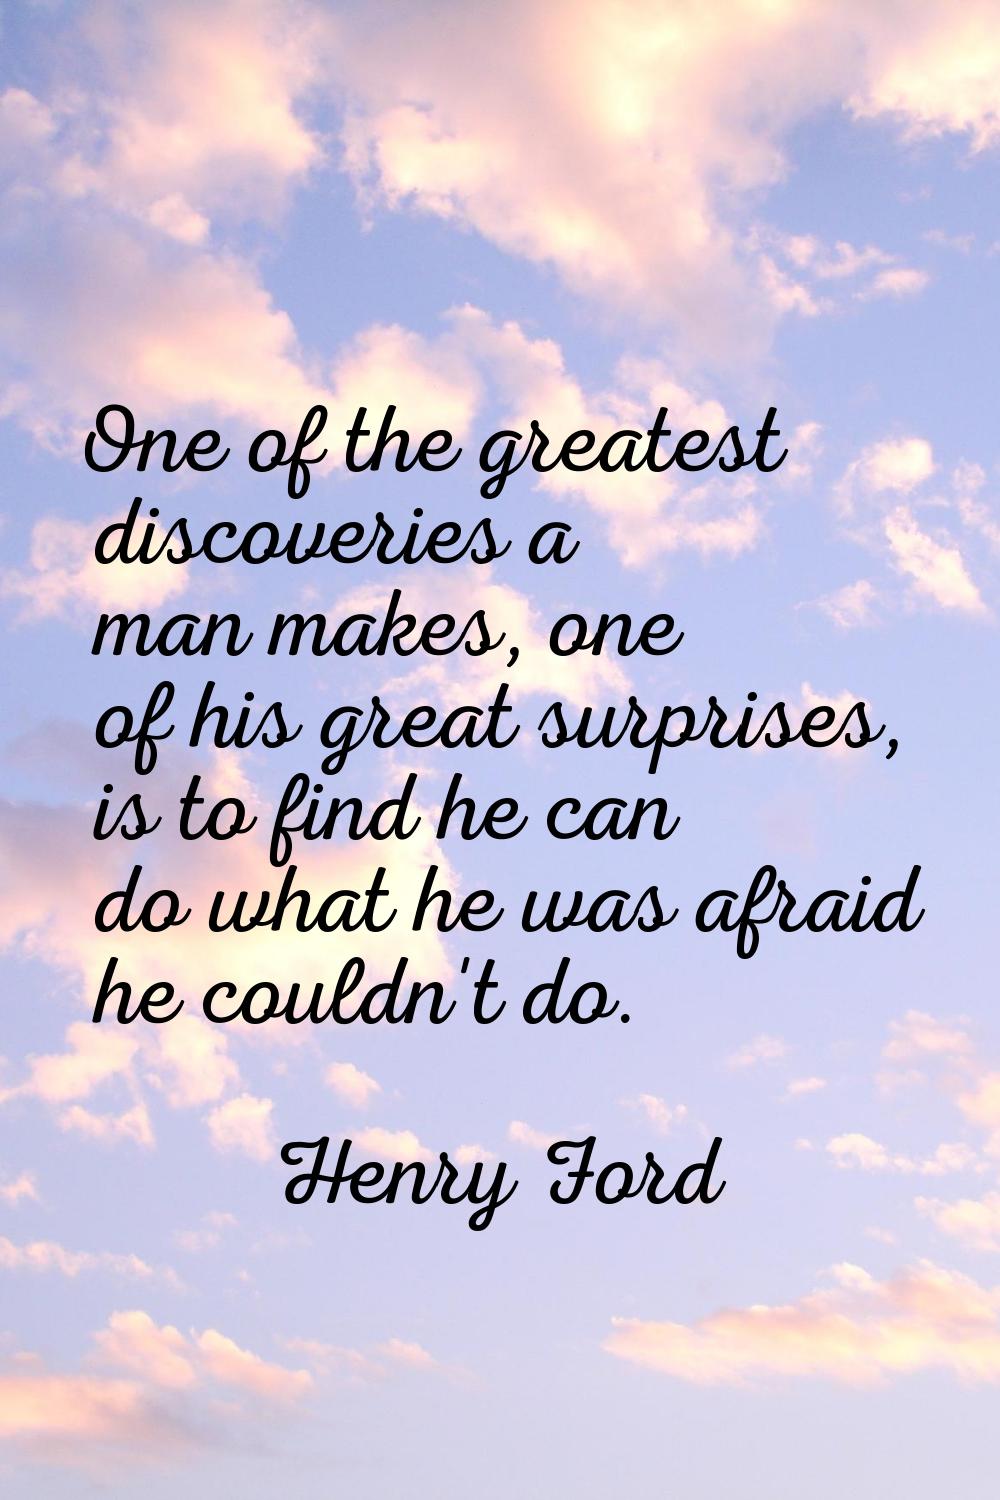 One of the greatest discoveries a man makes, one of his great surprises, is to find he can do what 